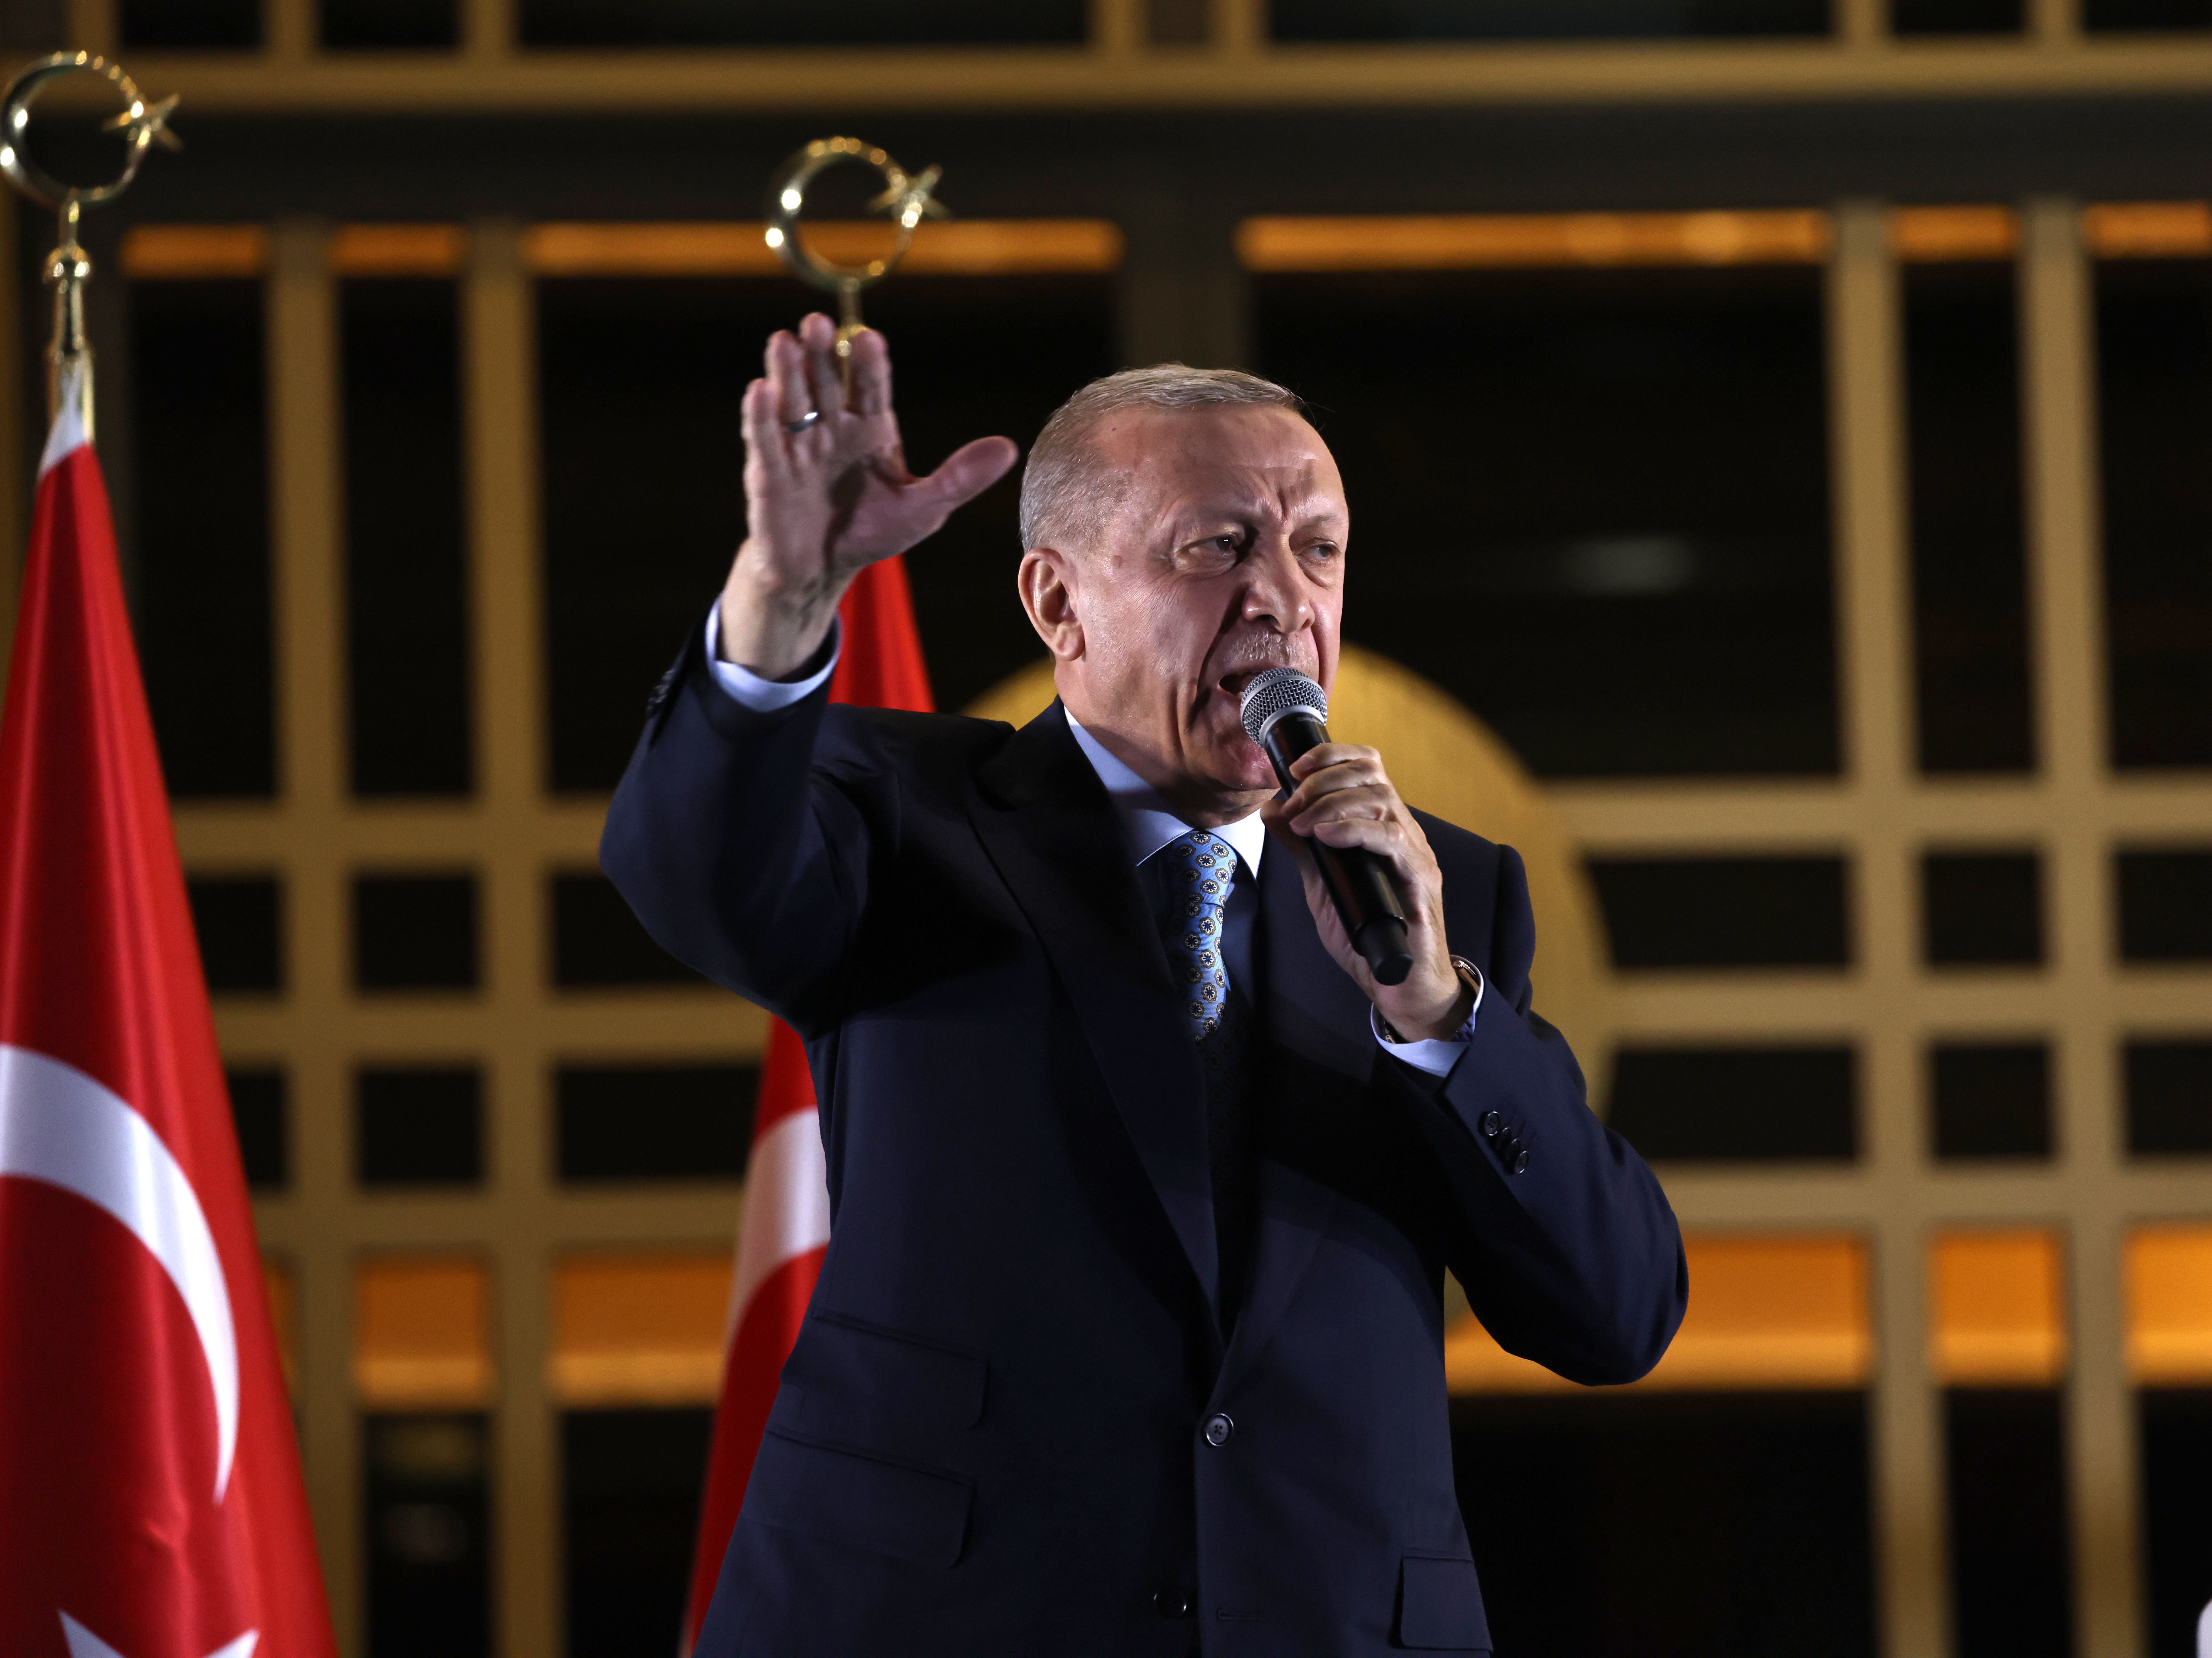 Erdogan addresses supporters outside his palace in Ankara on Sunday evening